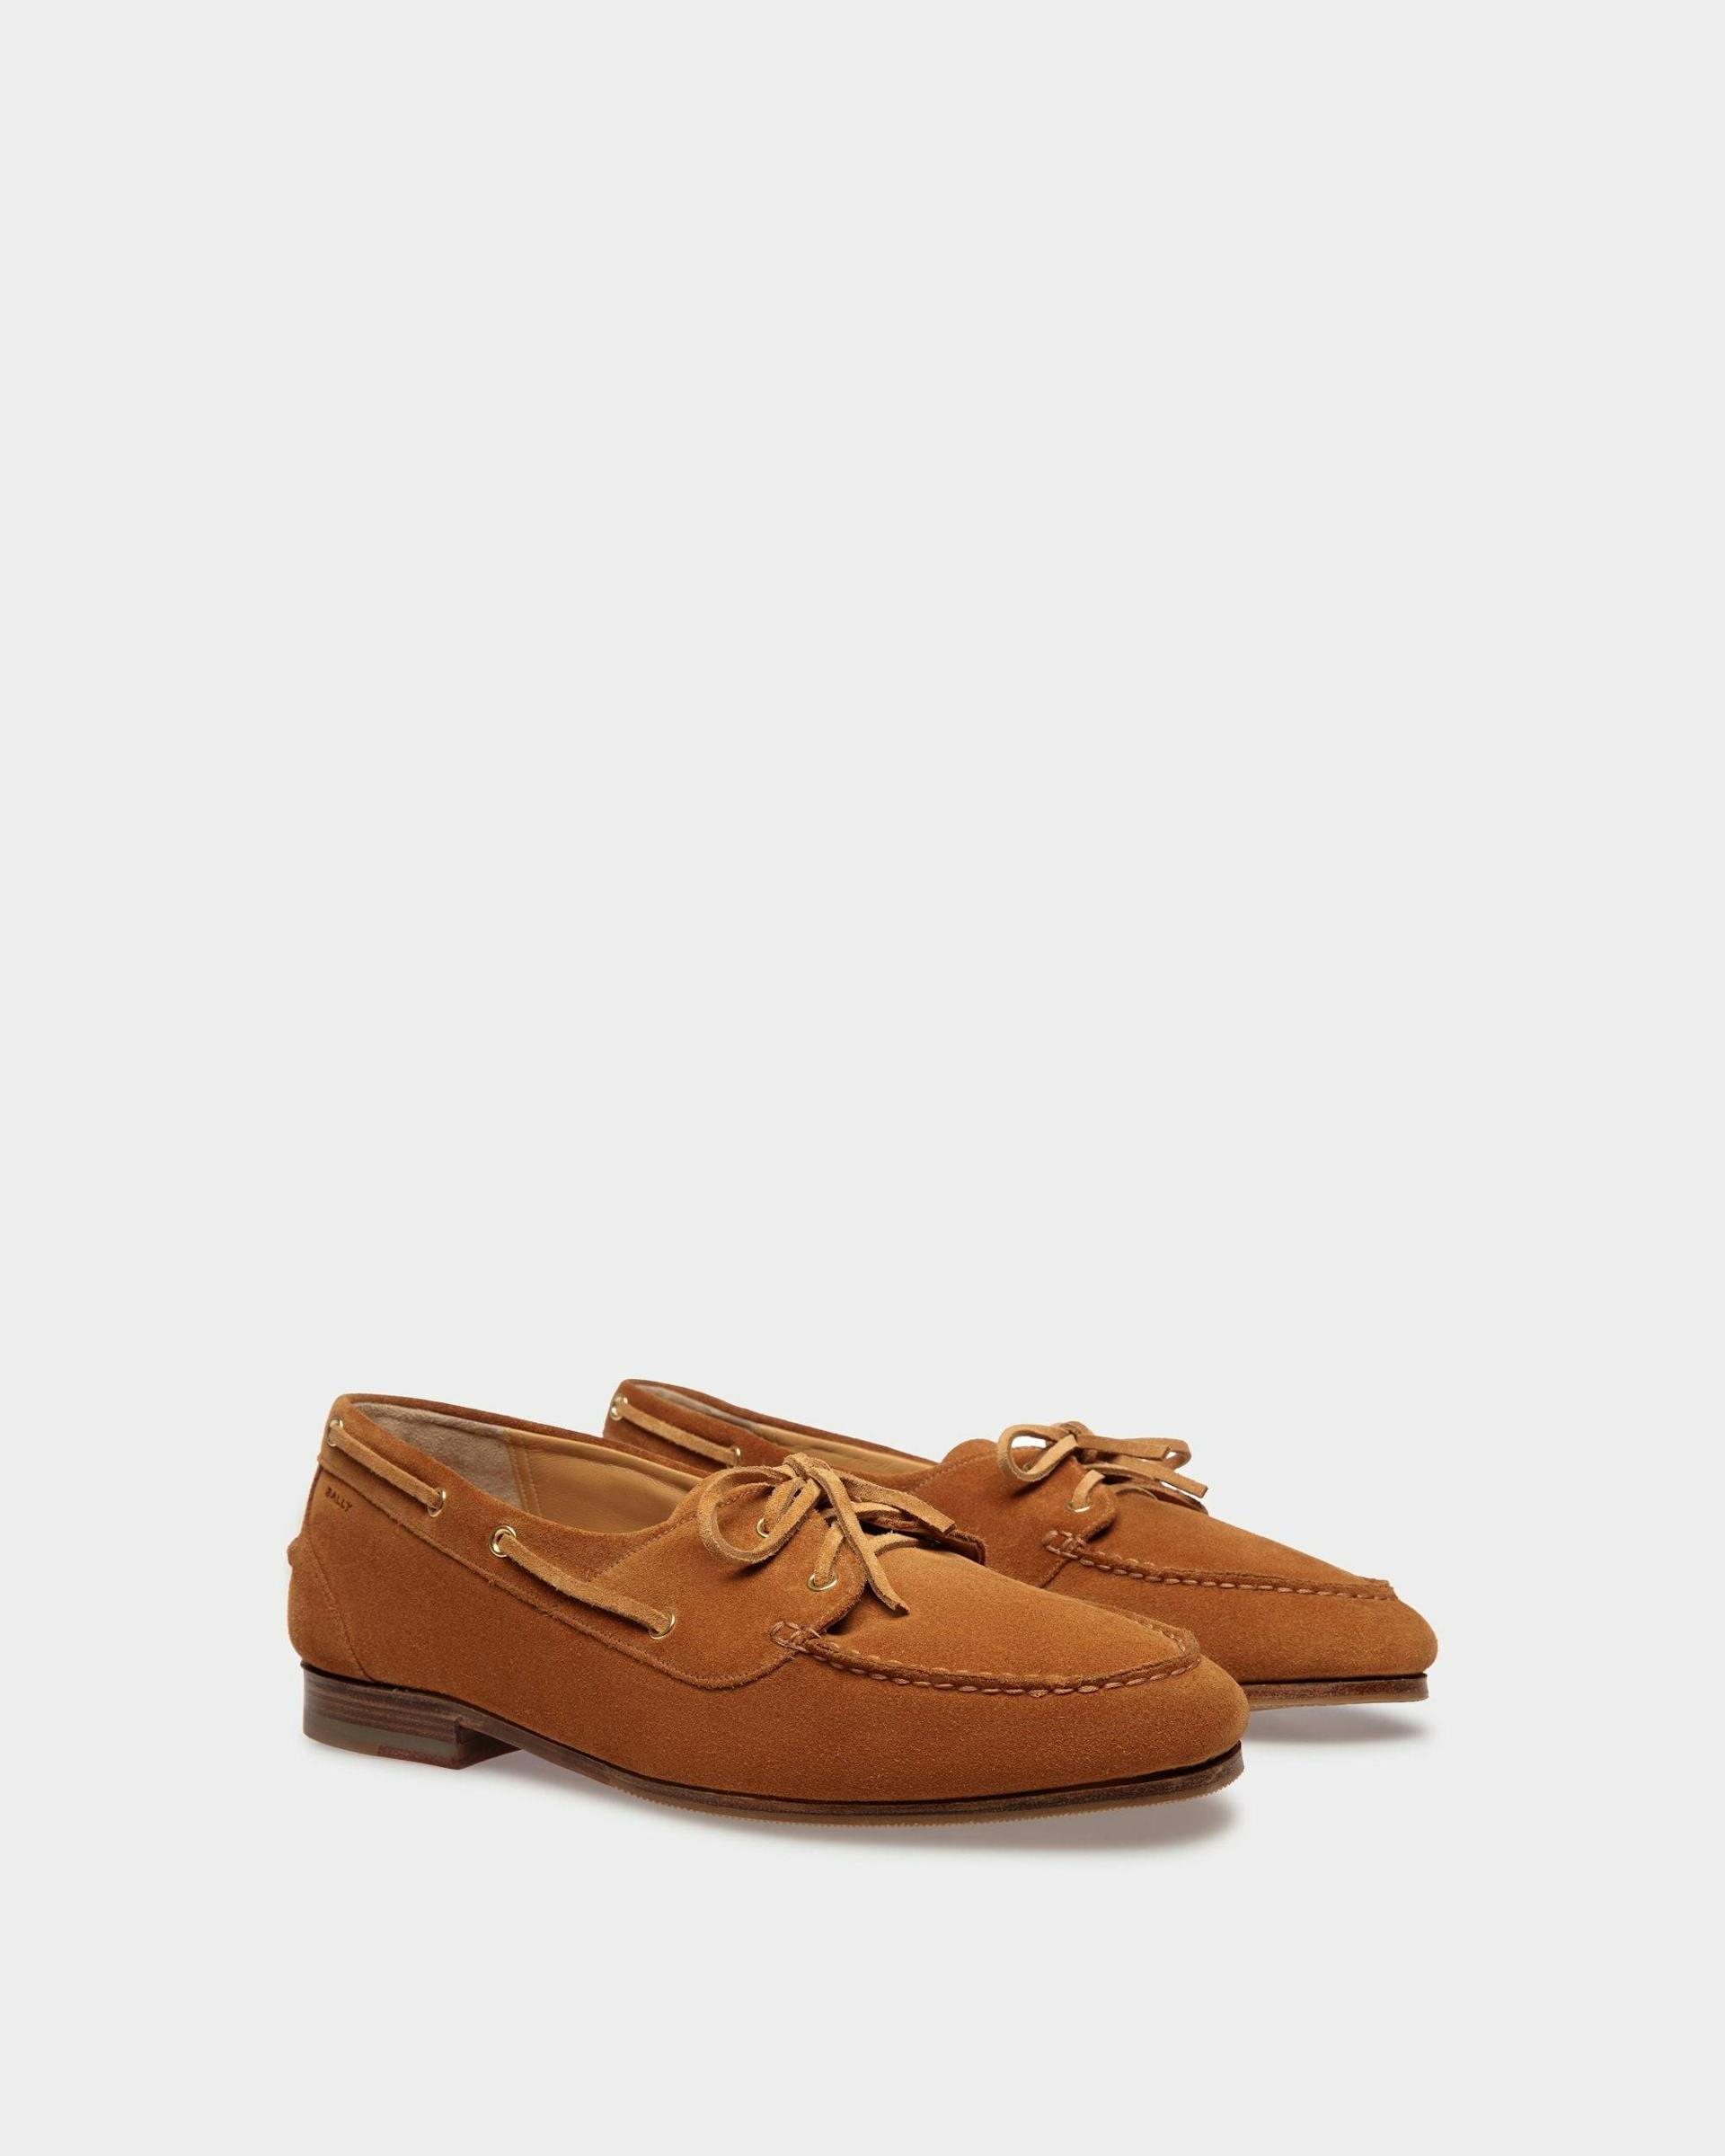 Men's Plume Moccasin in Brown Suede | Bally | Still Life 3/4 Front